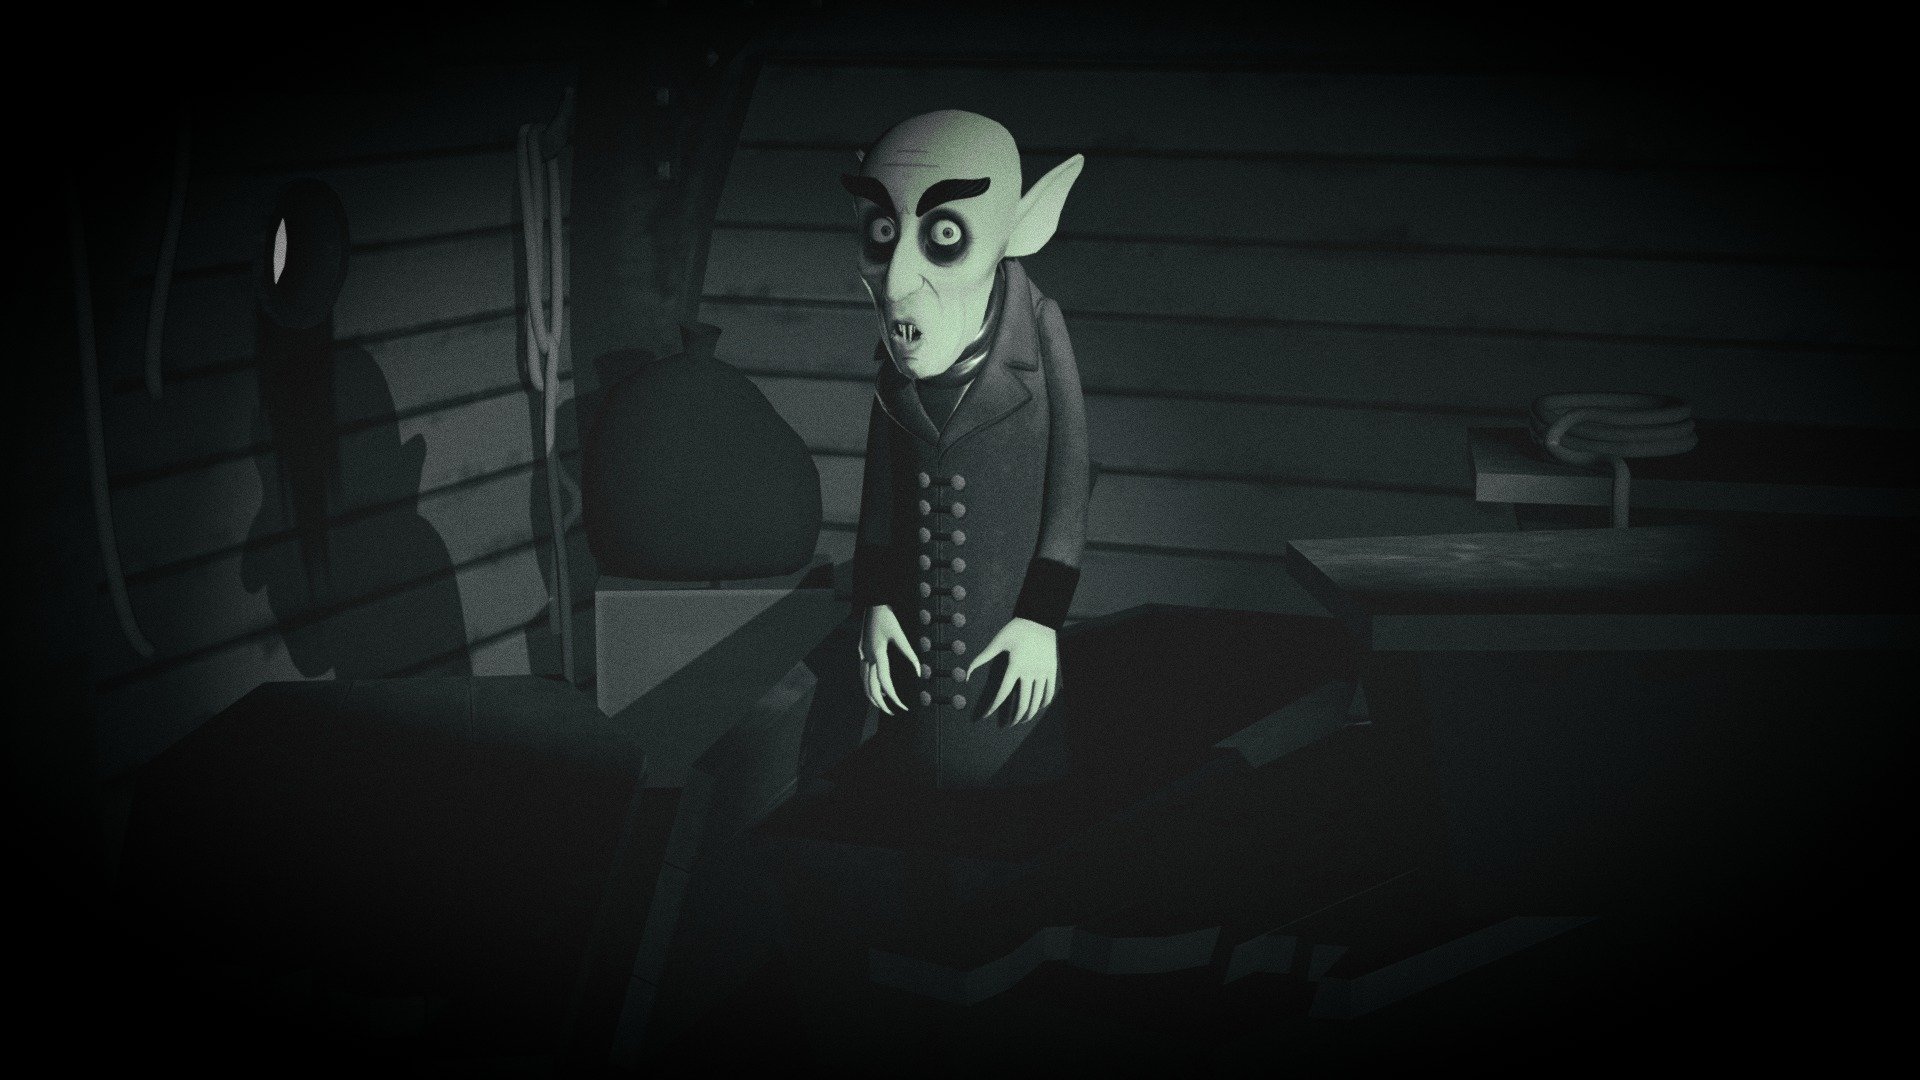 A remake of the rising scene from the movie &ldquo;Nosferatu